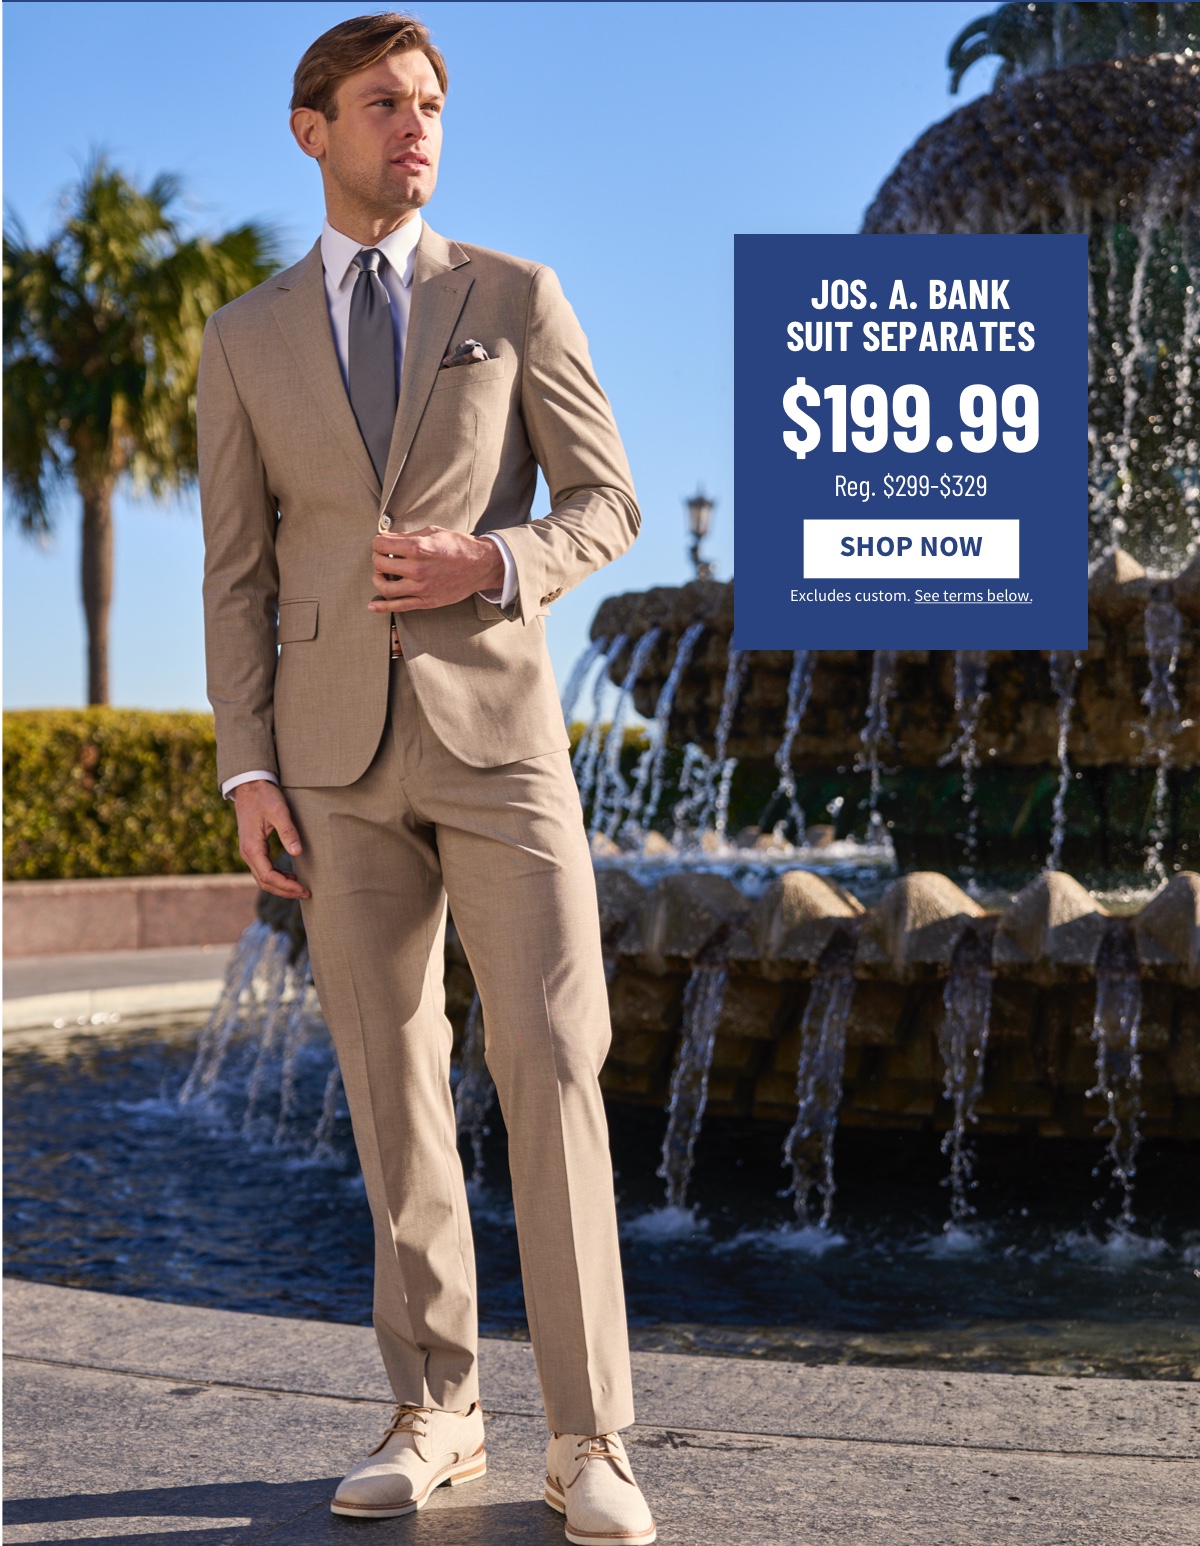 Jos. A. Bank Suit Separates $199.99 Reg. $299-$329. Shop Now. While supplies last. Select sizes, styles, and colors. Excludes custom. See terms below.